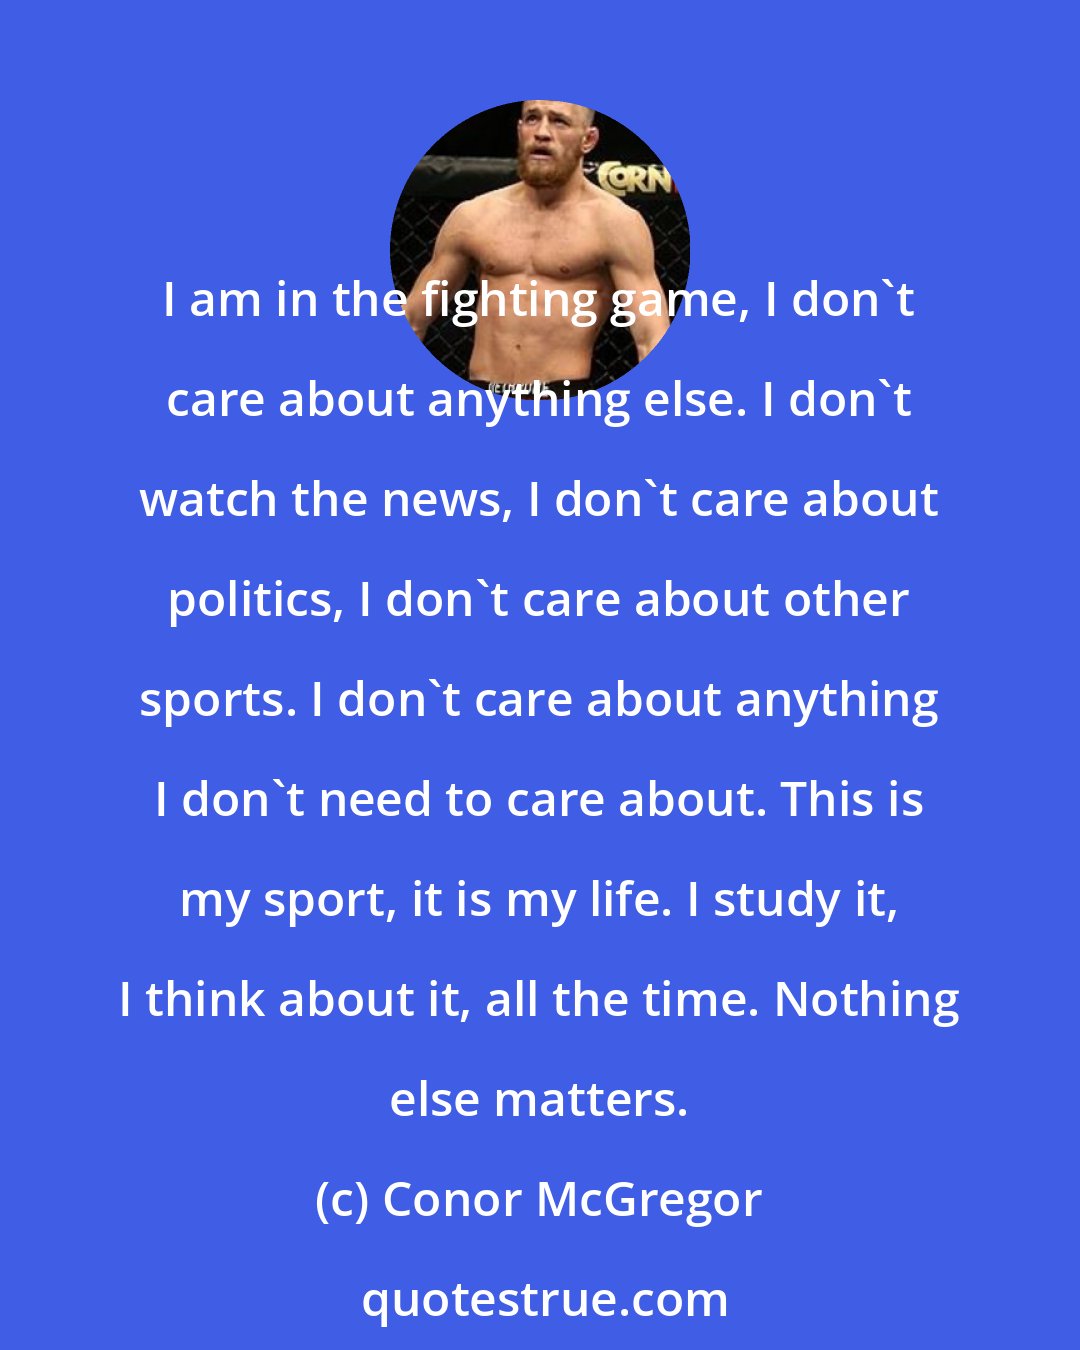 Conor McGregor: I am in the fighting game, I don't care about anything else. I don't watch the news, I don't care about politics, I don't care about other sports. I don't care about anything I don't need to care about. This is my sport, it is my life. I study it, I think about it, all the time. Nothing else matters.